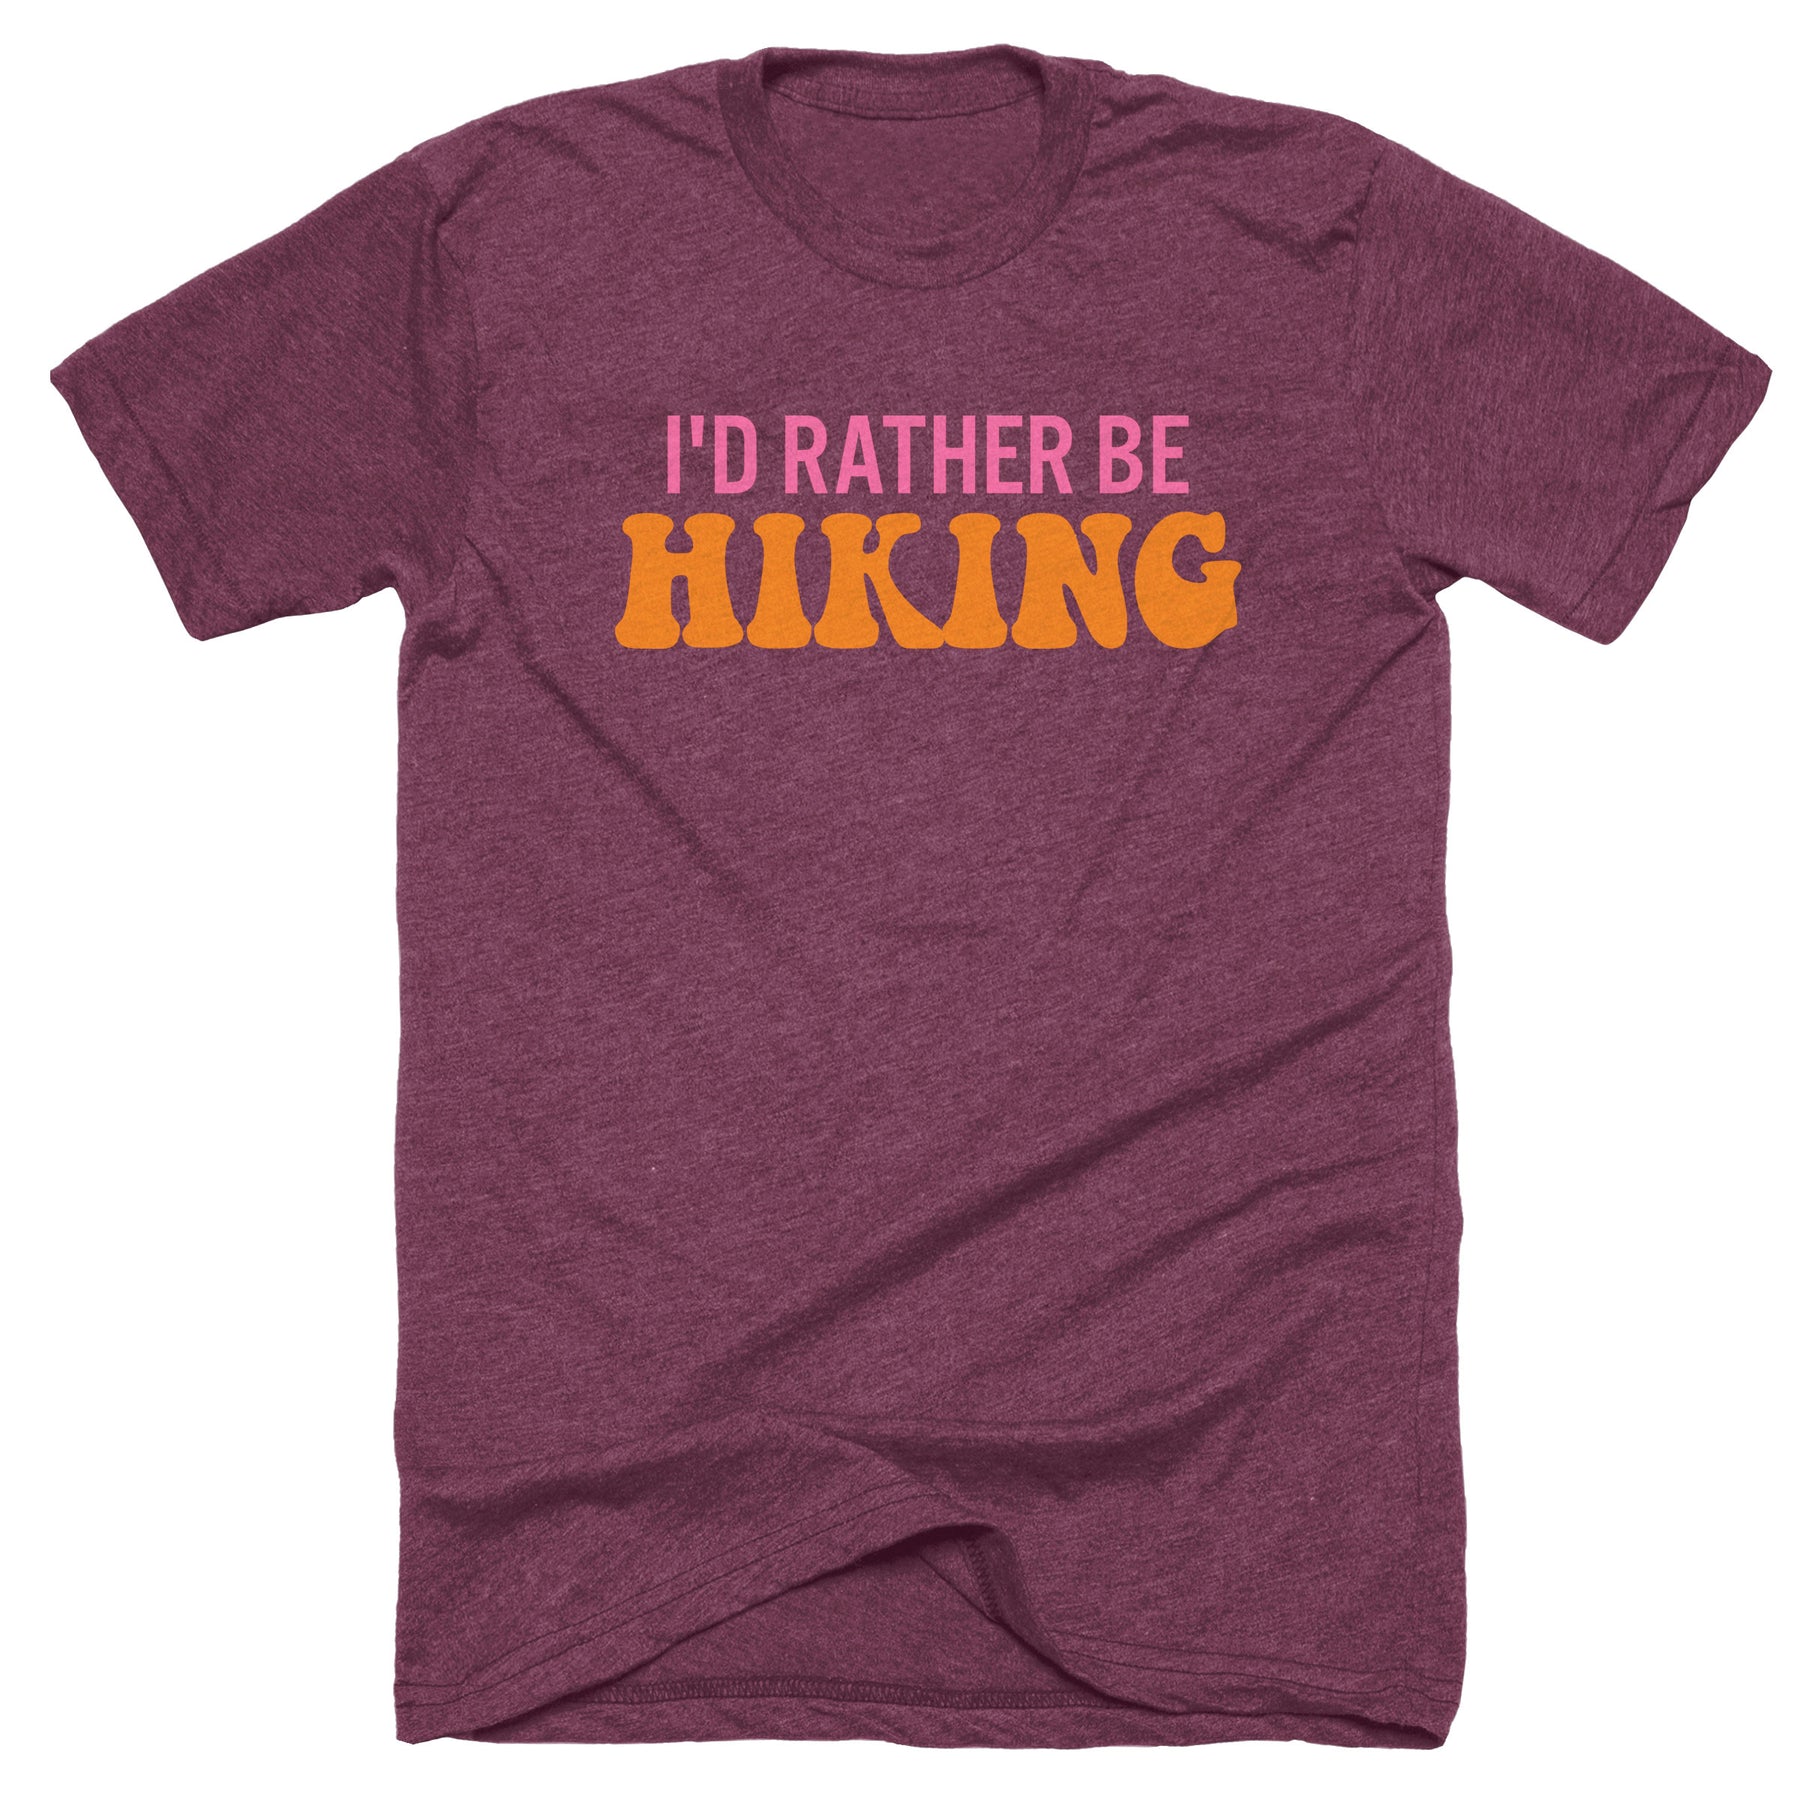 I'd Rather Be Hiking Tee